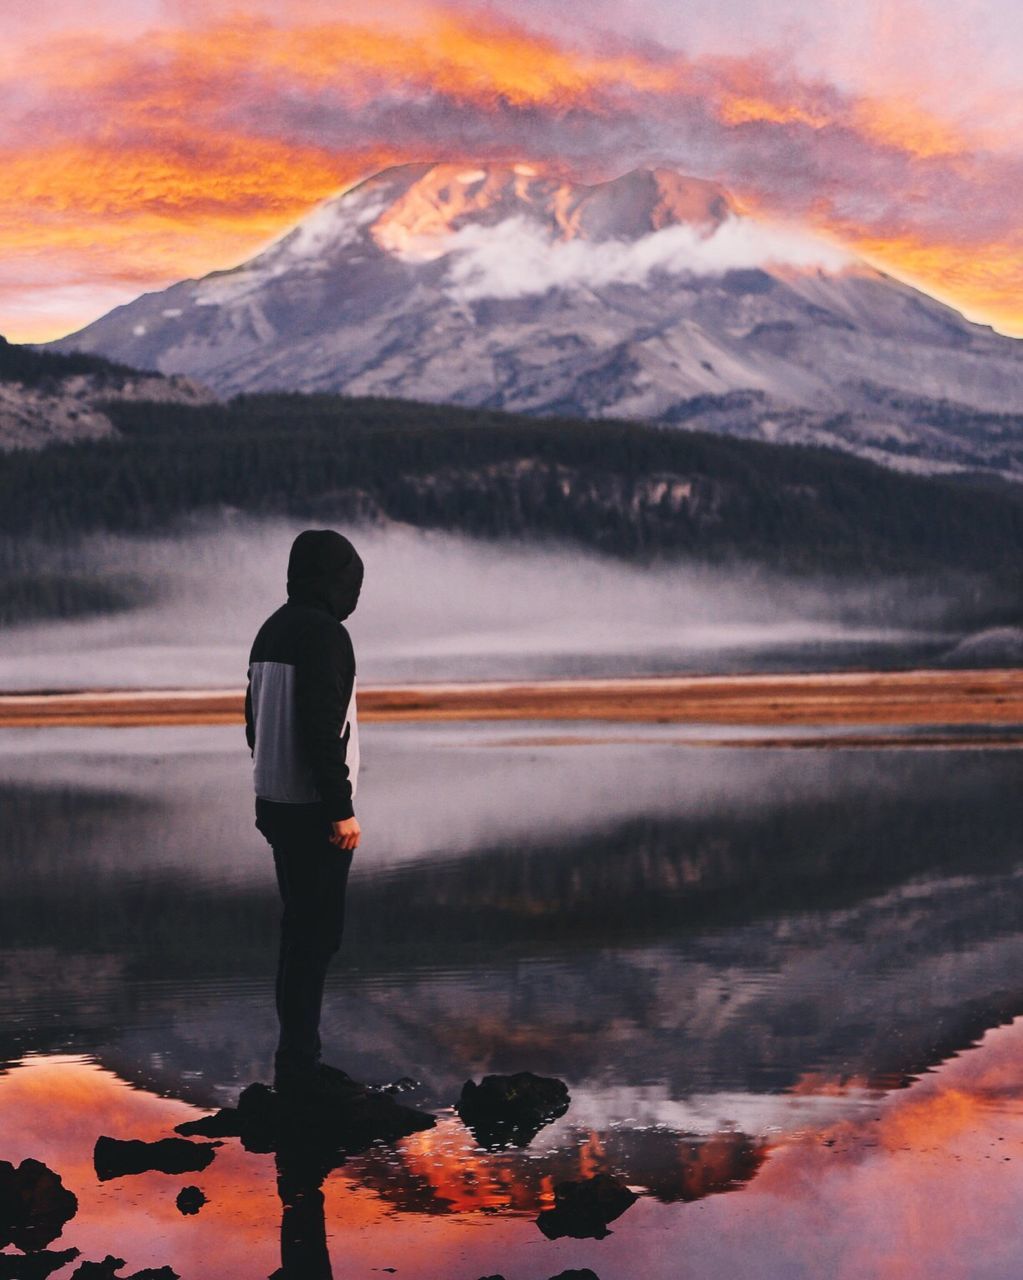 Man standing on rock in sparks lake against mountain during sunset